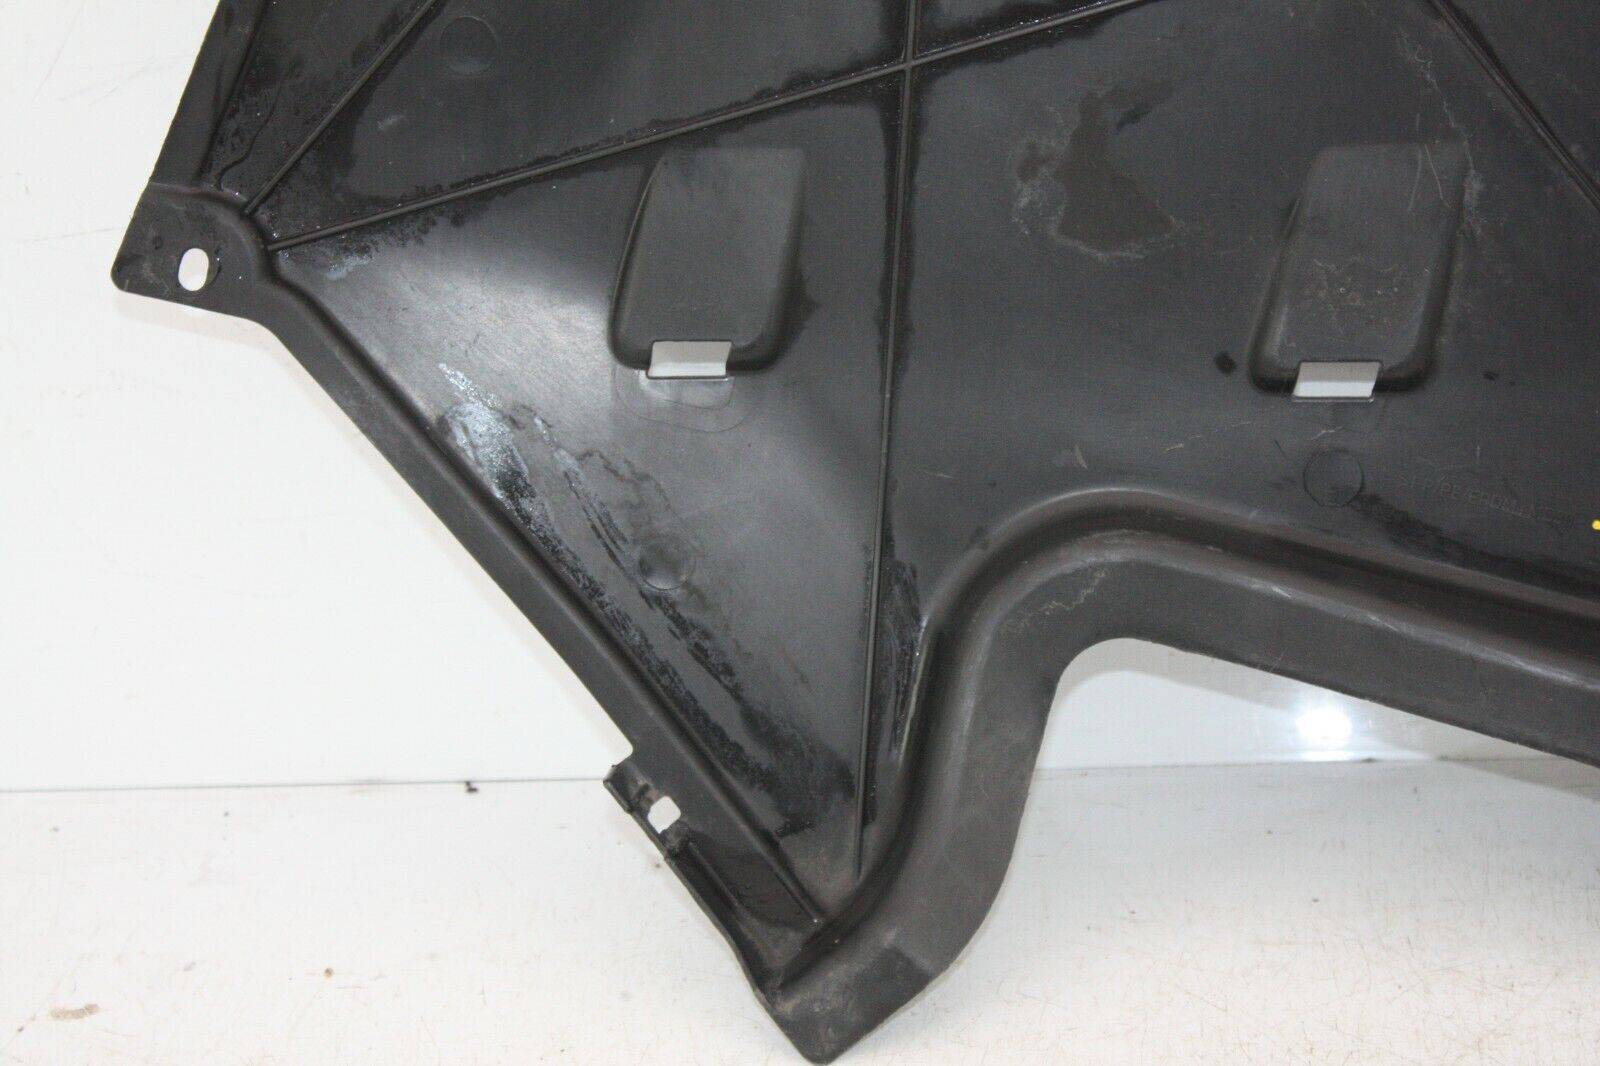 Audi-A4-Rear-Right-Underbody-Tray-Cover-2015-TO-2018-8W0825219A-175367535392-10